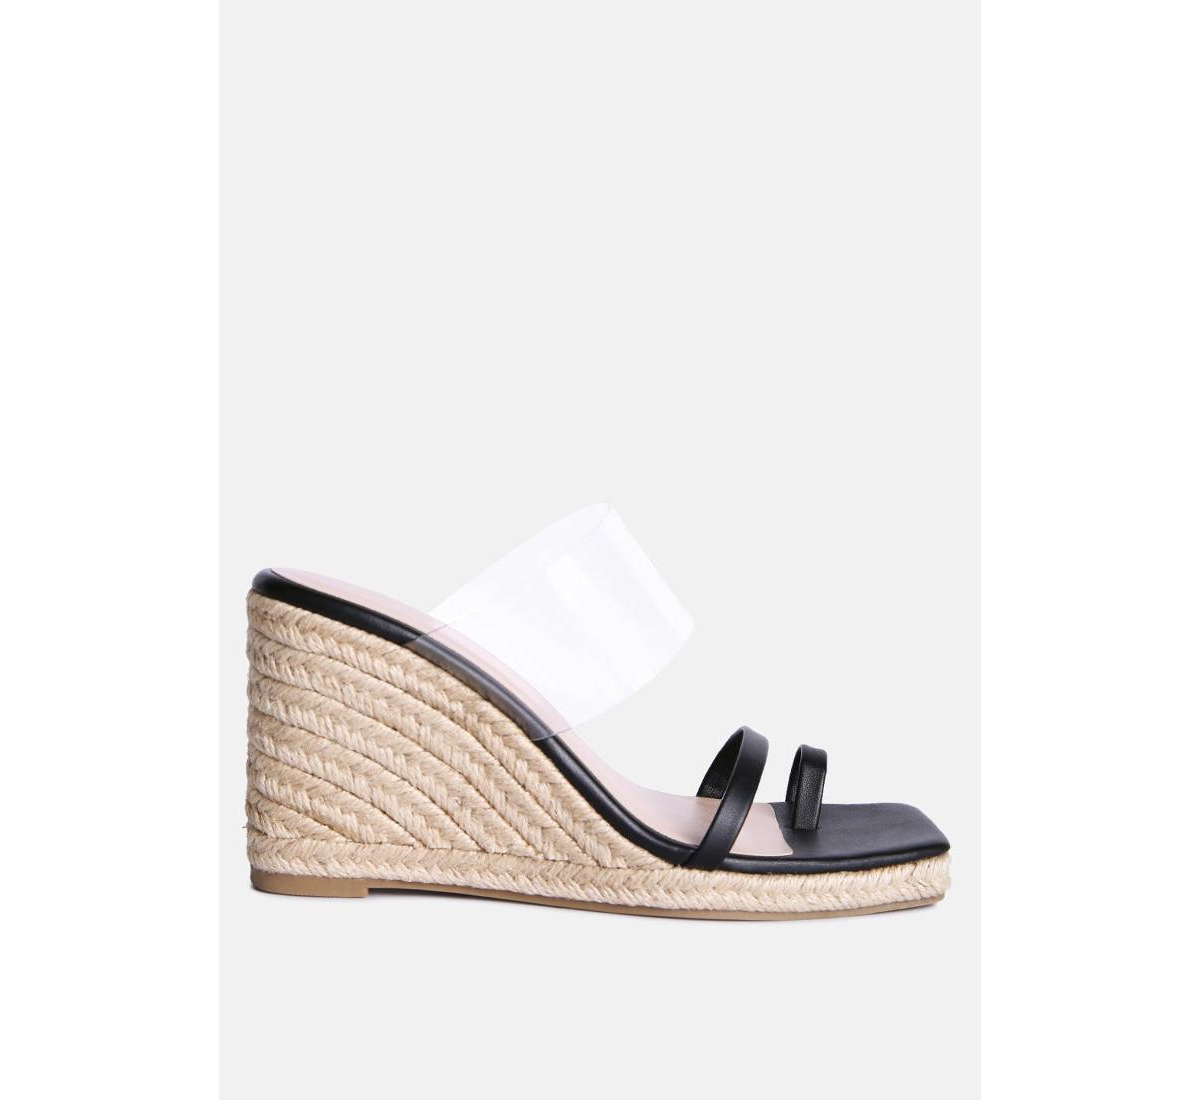 clear path toe ring espadrilles wedge sandals - Black